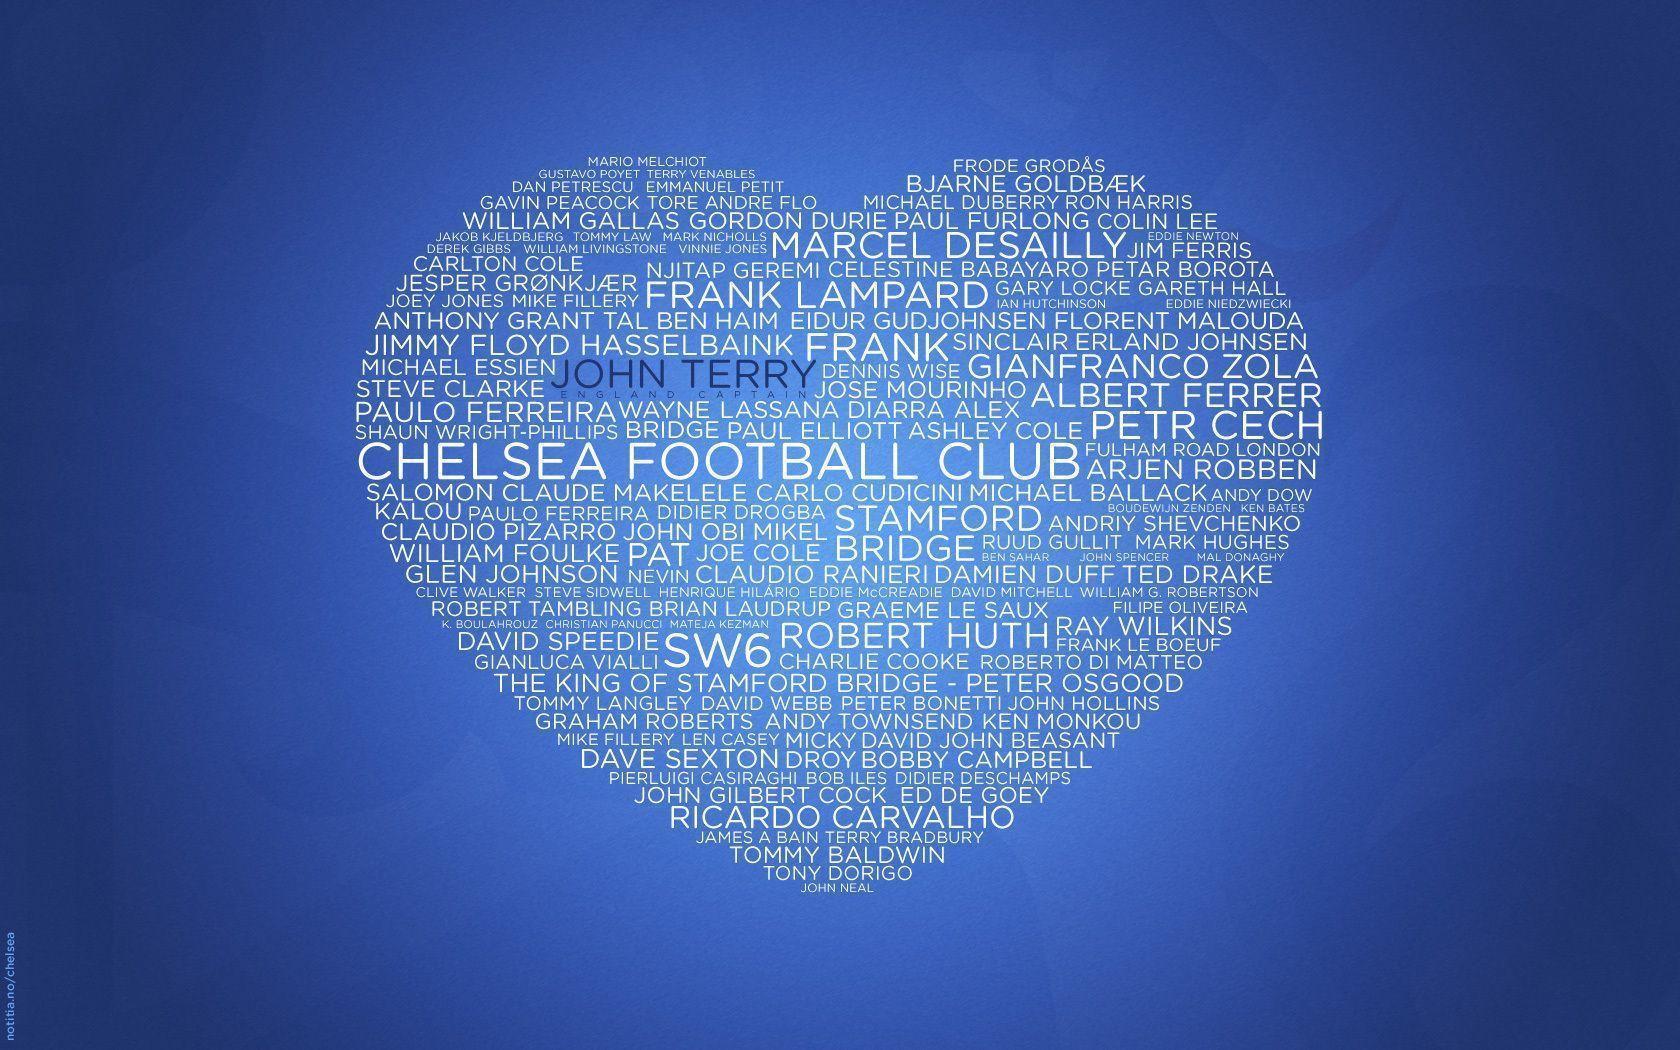 Chelsea Football Club Wallpaper. Download Picture and Photo Free